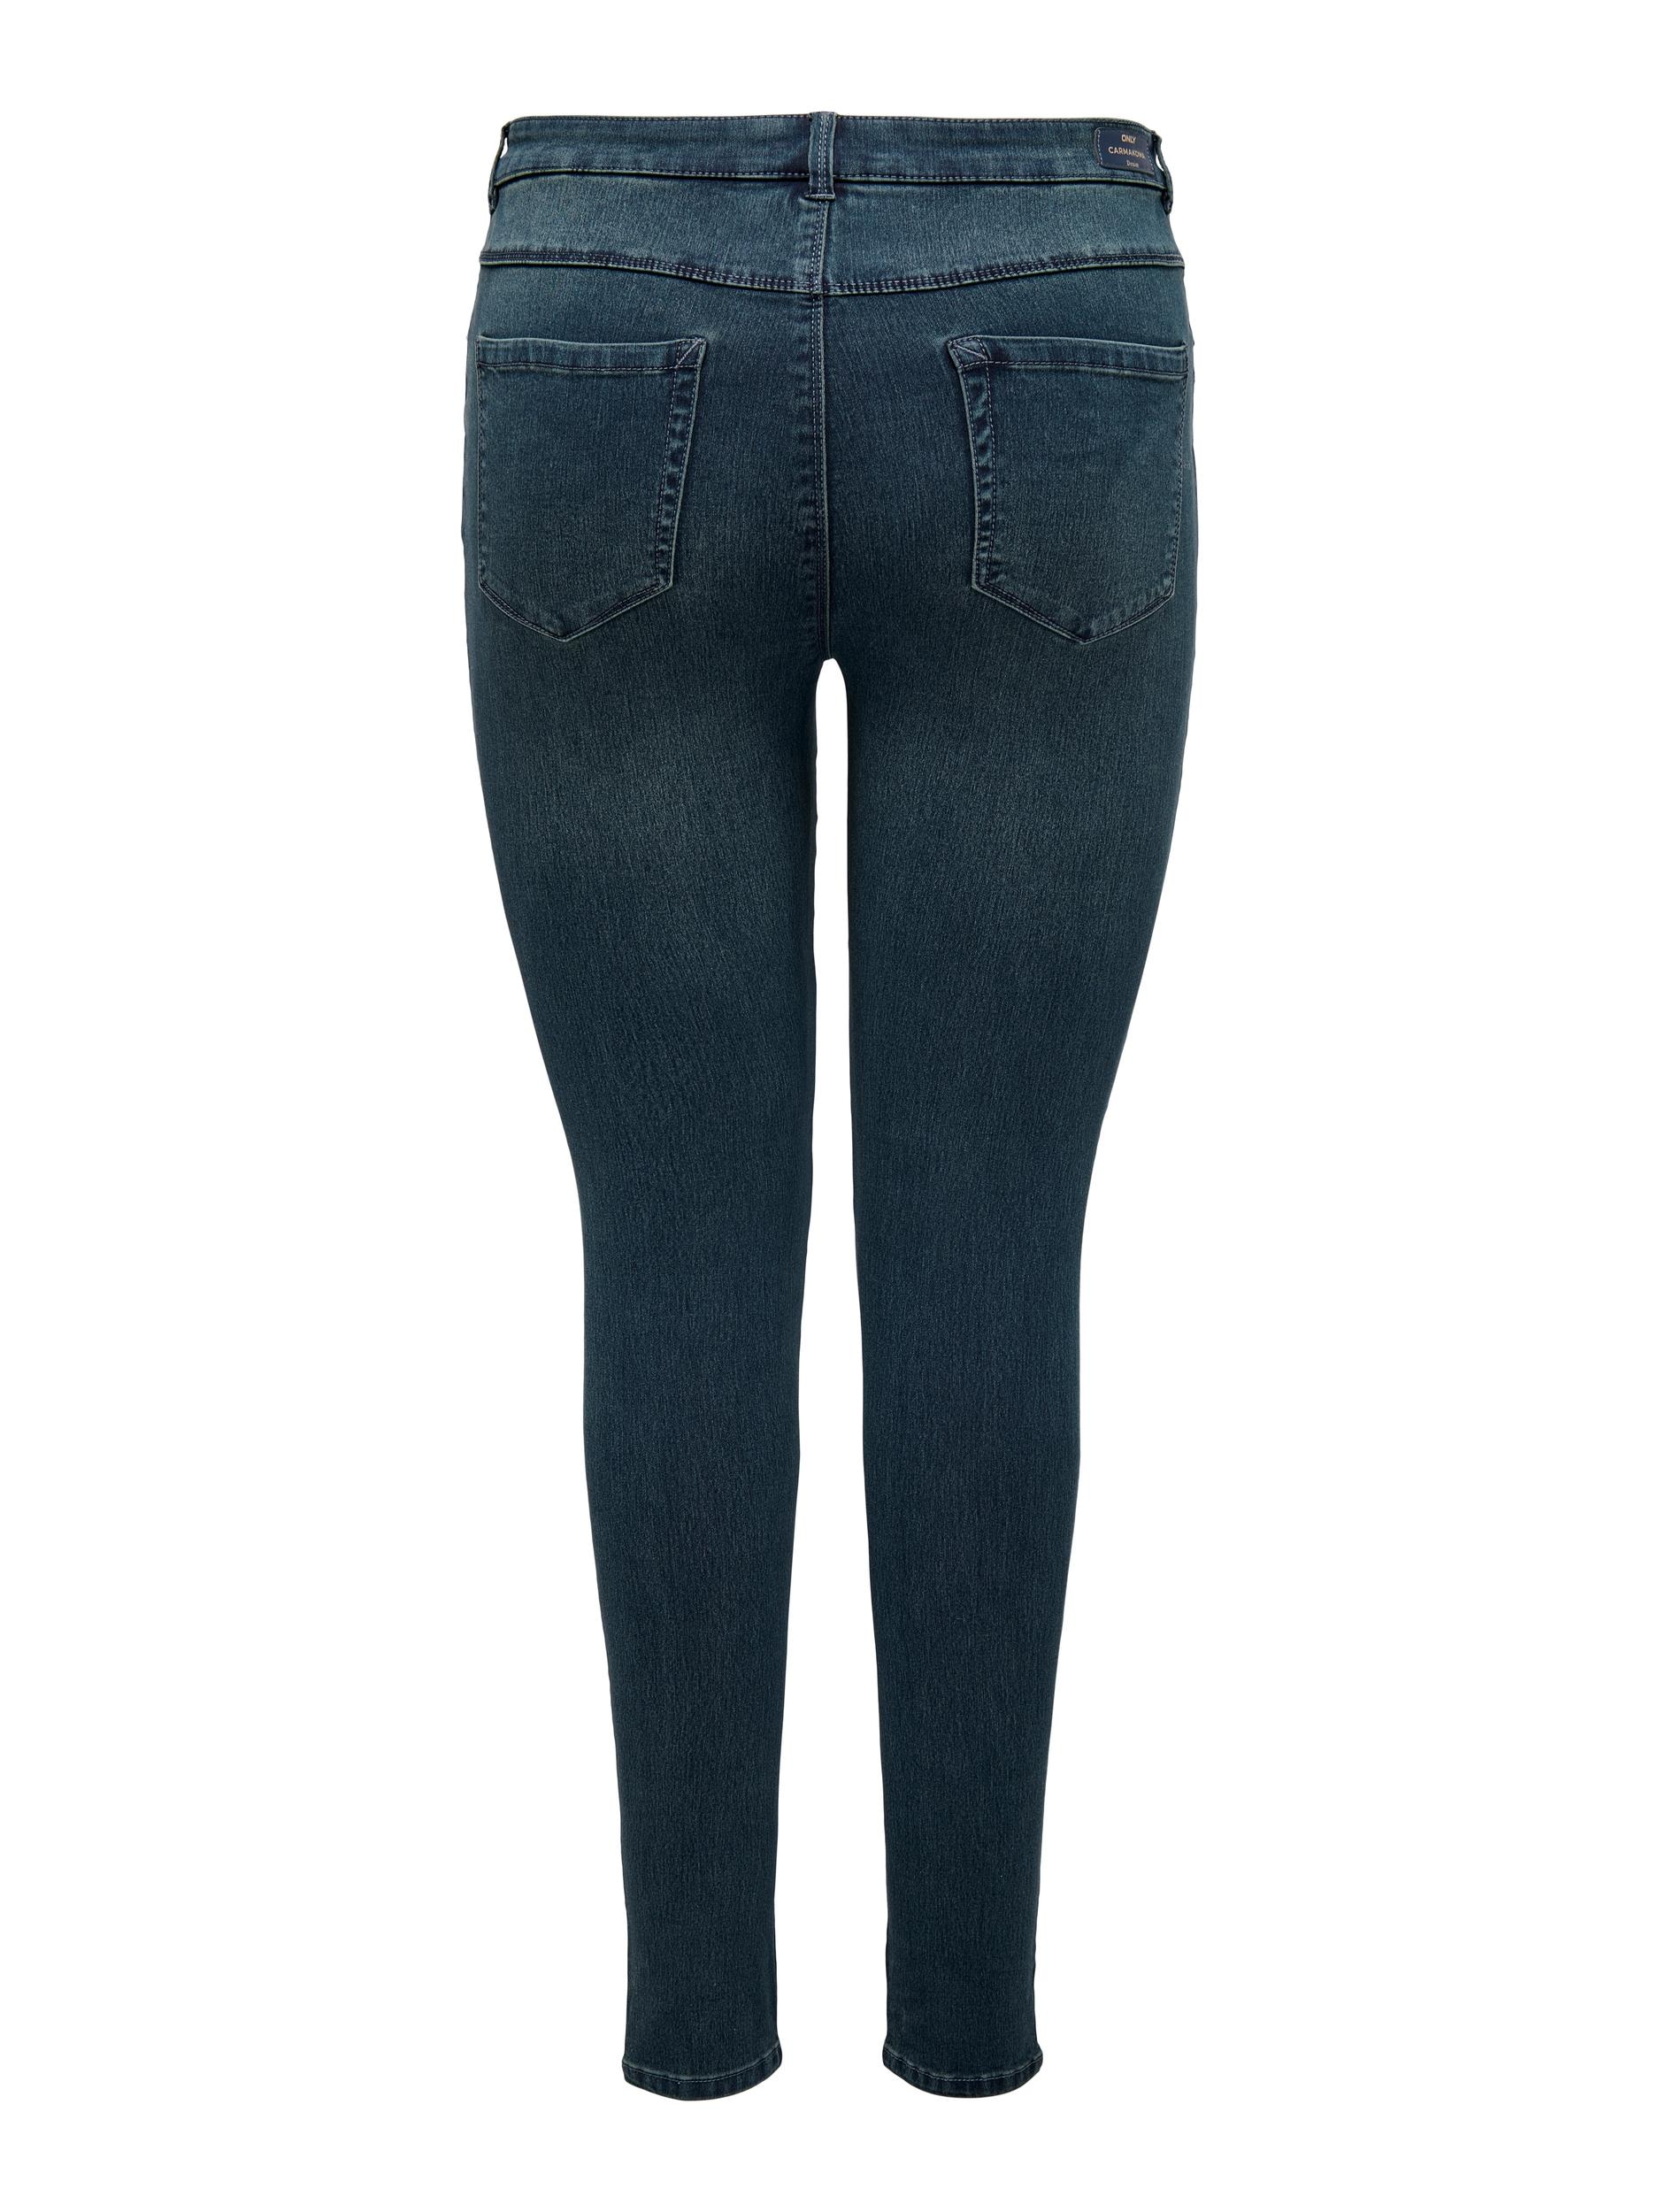 »CARAUGUSTA NOOS« DNM Skinny-fit-Jeans CARMAKOMA bei ONLY OTTO HW BJ558 SKINNY